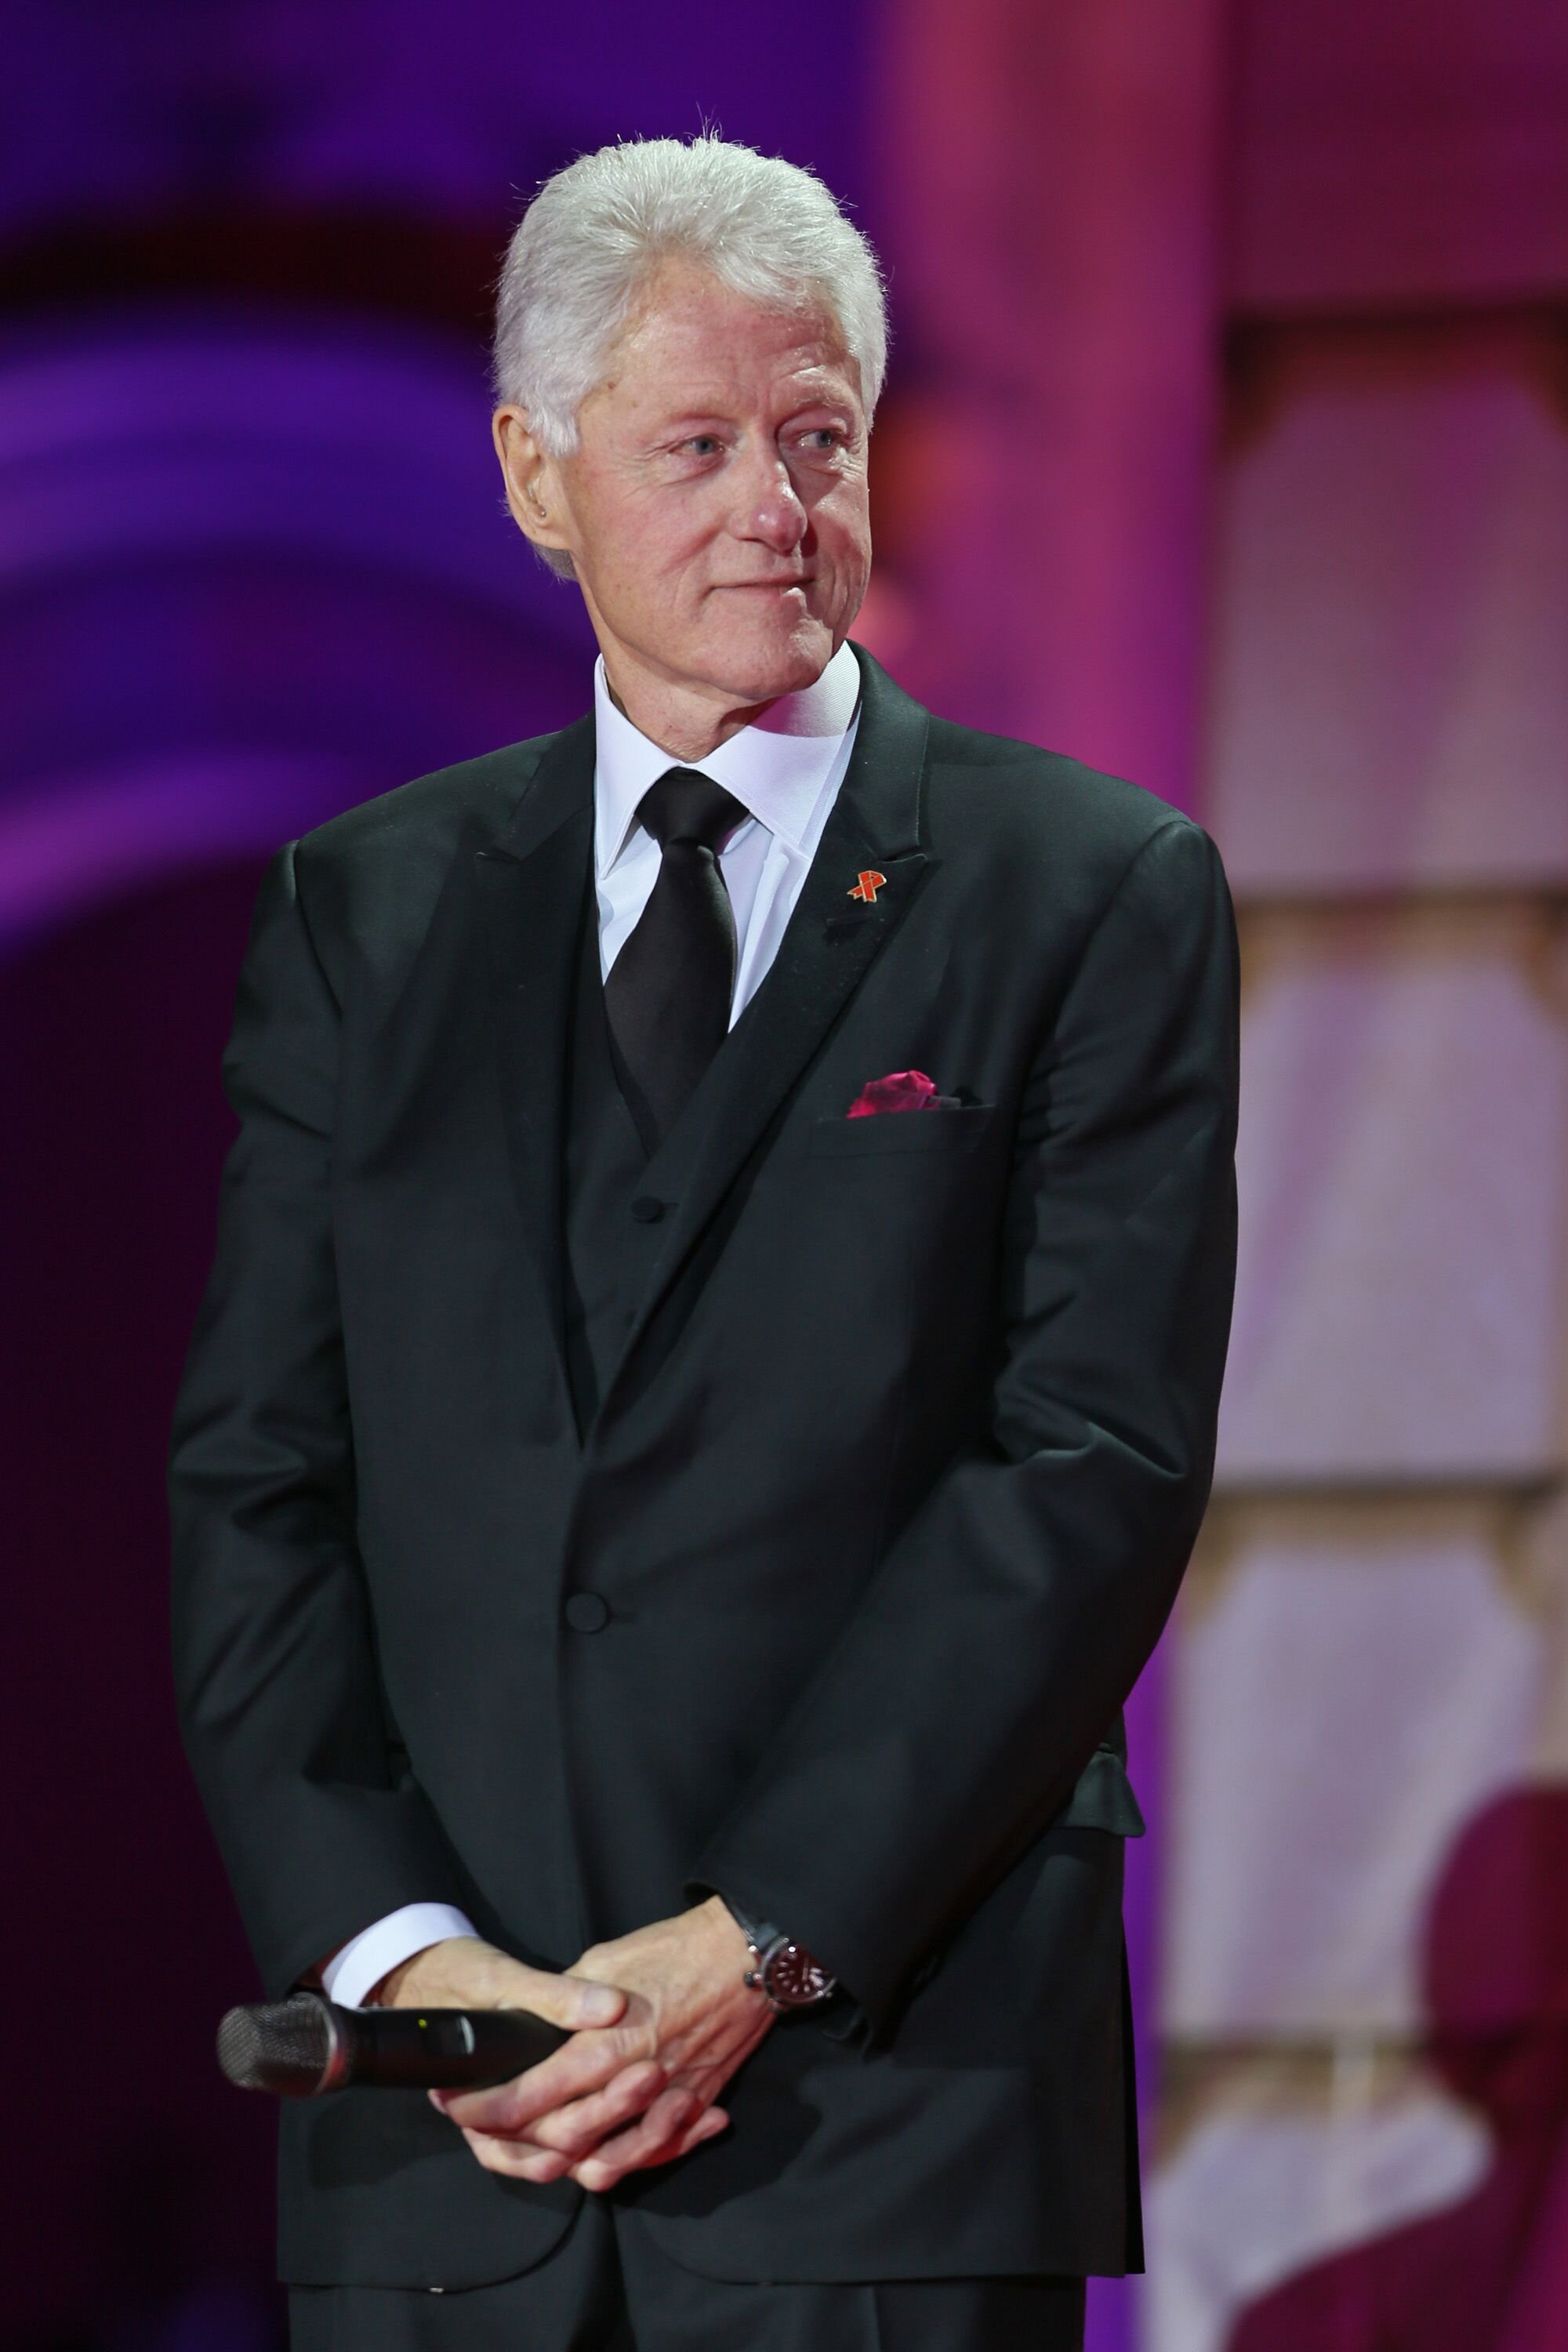 Bill Clinton attends the 'Life Ball 2013 - Show' at City Hall. | Source: Getty Images